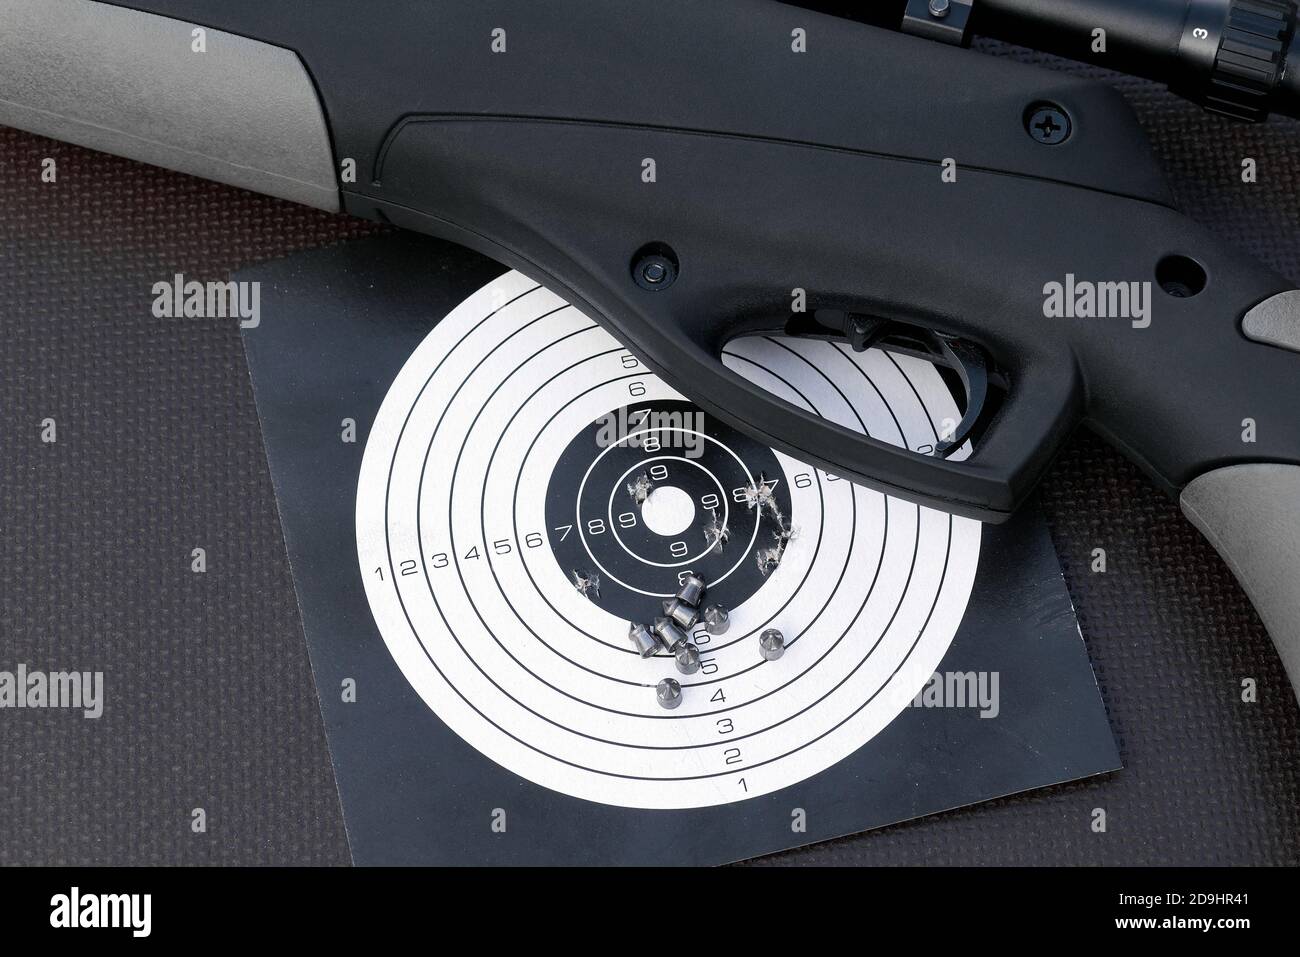 top view of air gun, paper shooting target with bullet holes and airgun pellets Stock Photo